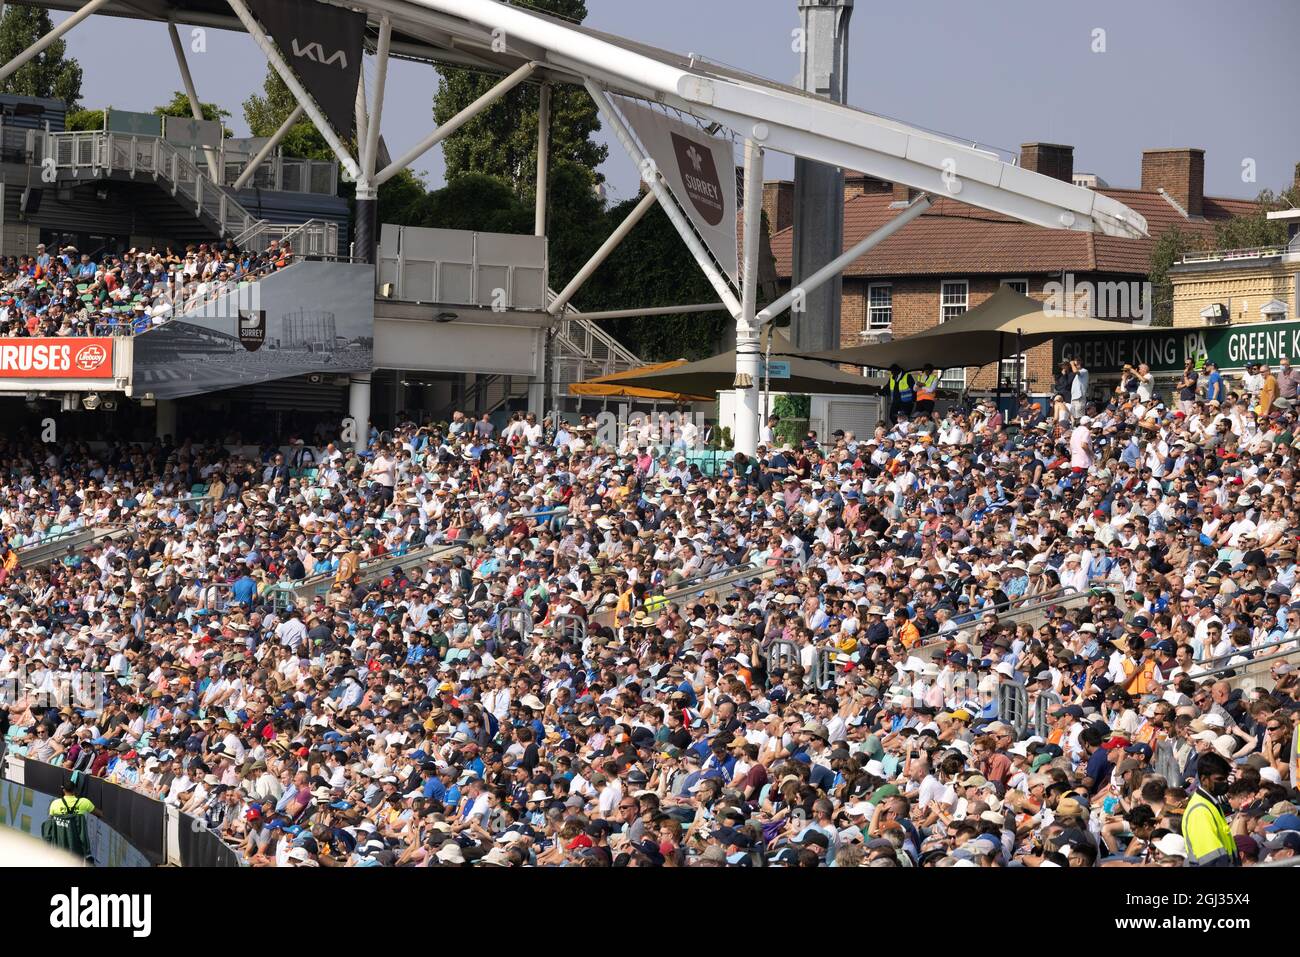 Cricket spectators UK - Crowds of people watching the England vs India test match, July 2021 at the Oval Cricket ground ( The Kia Oval ), London UK Stock Photo